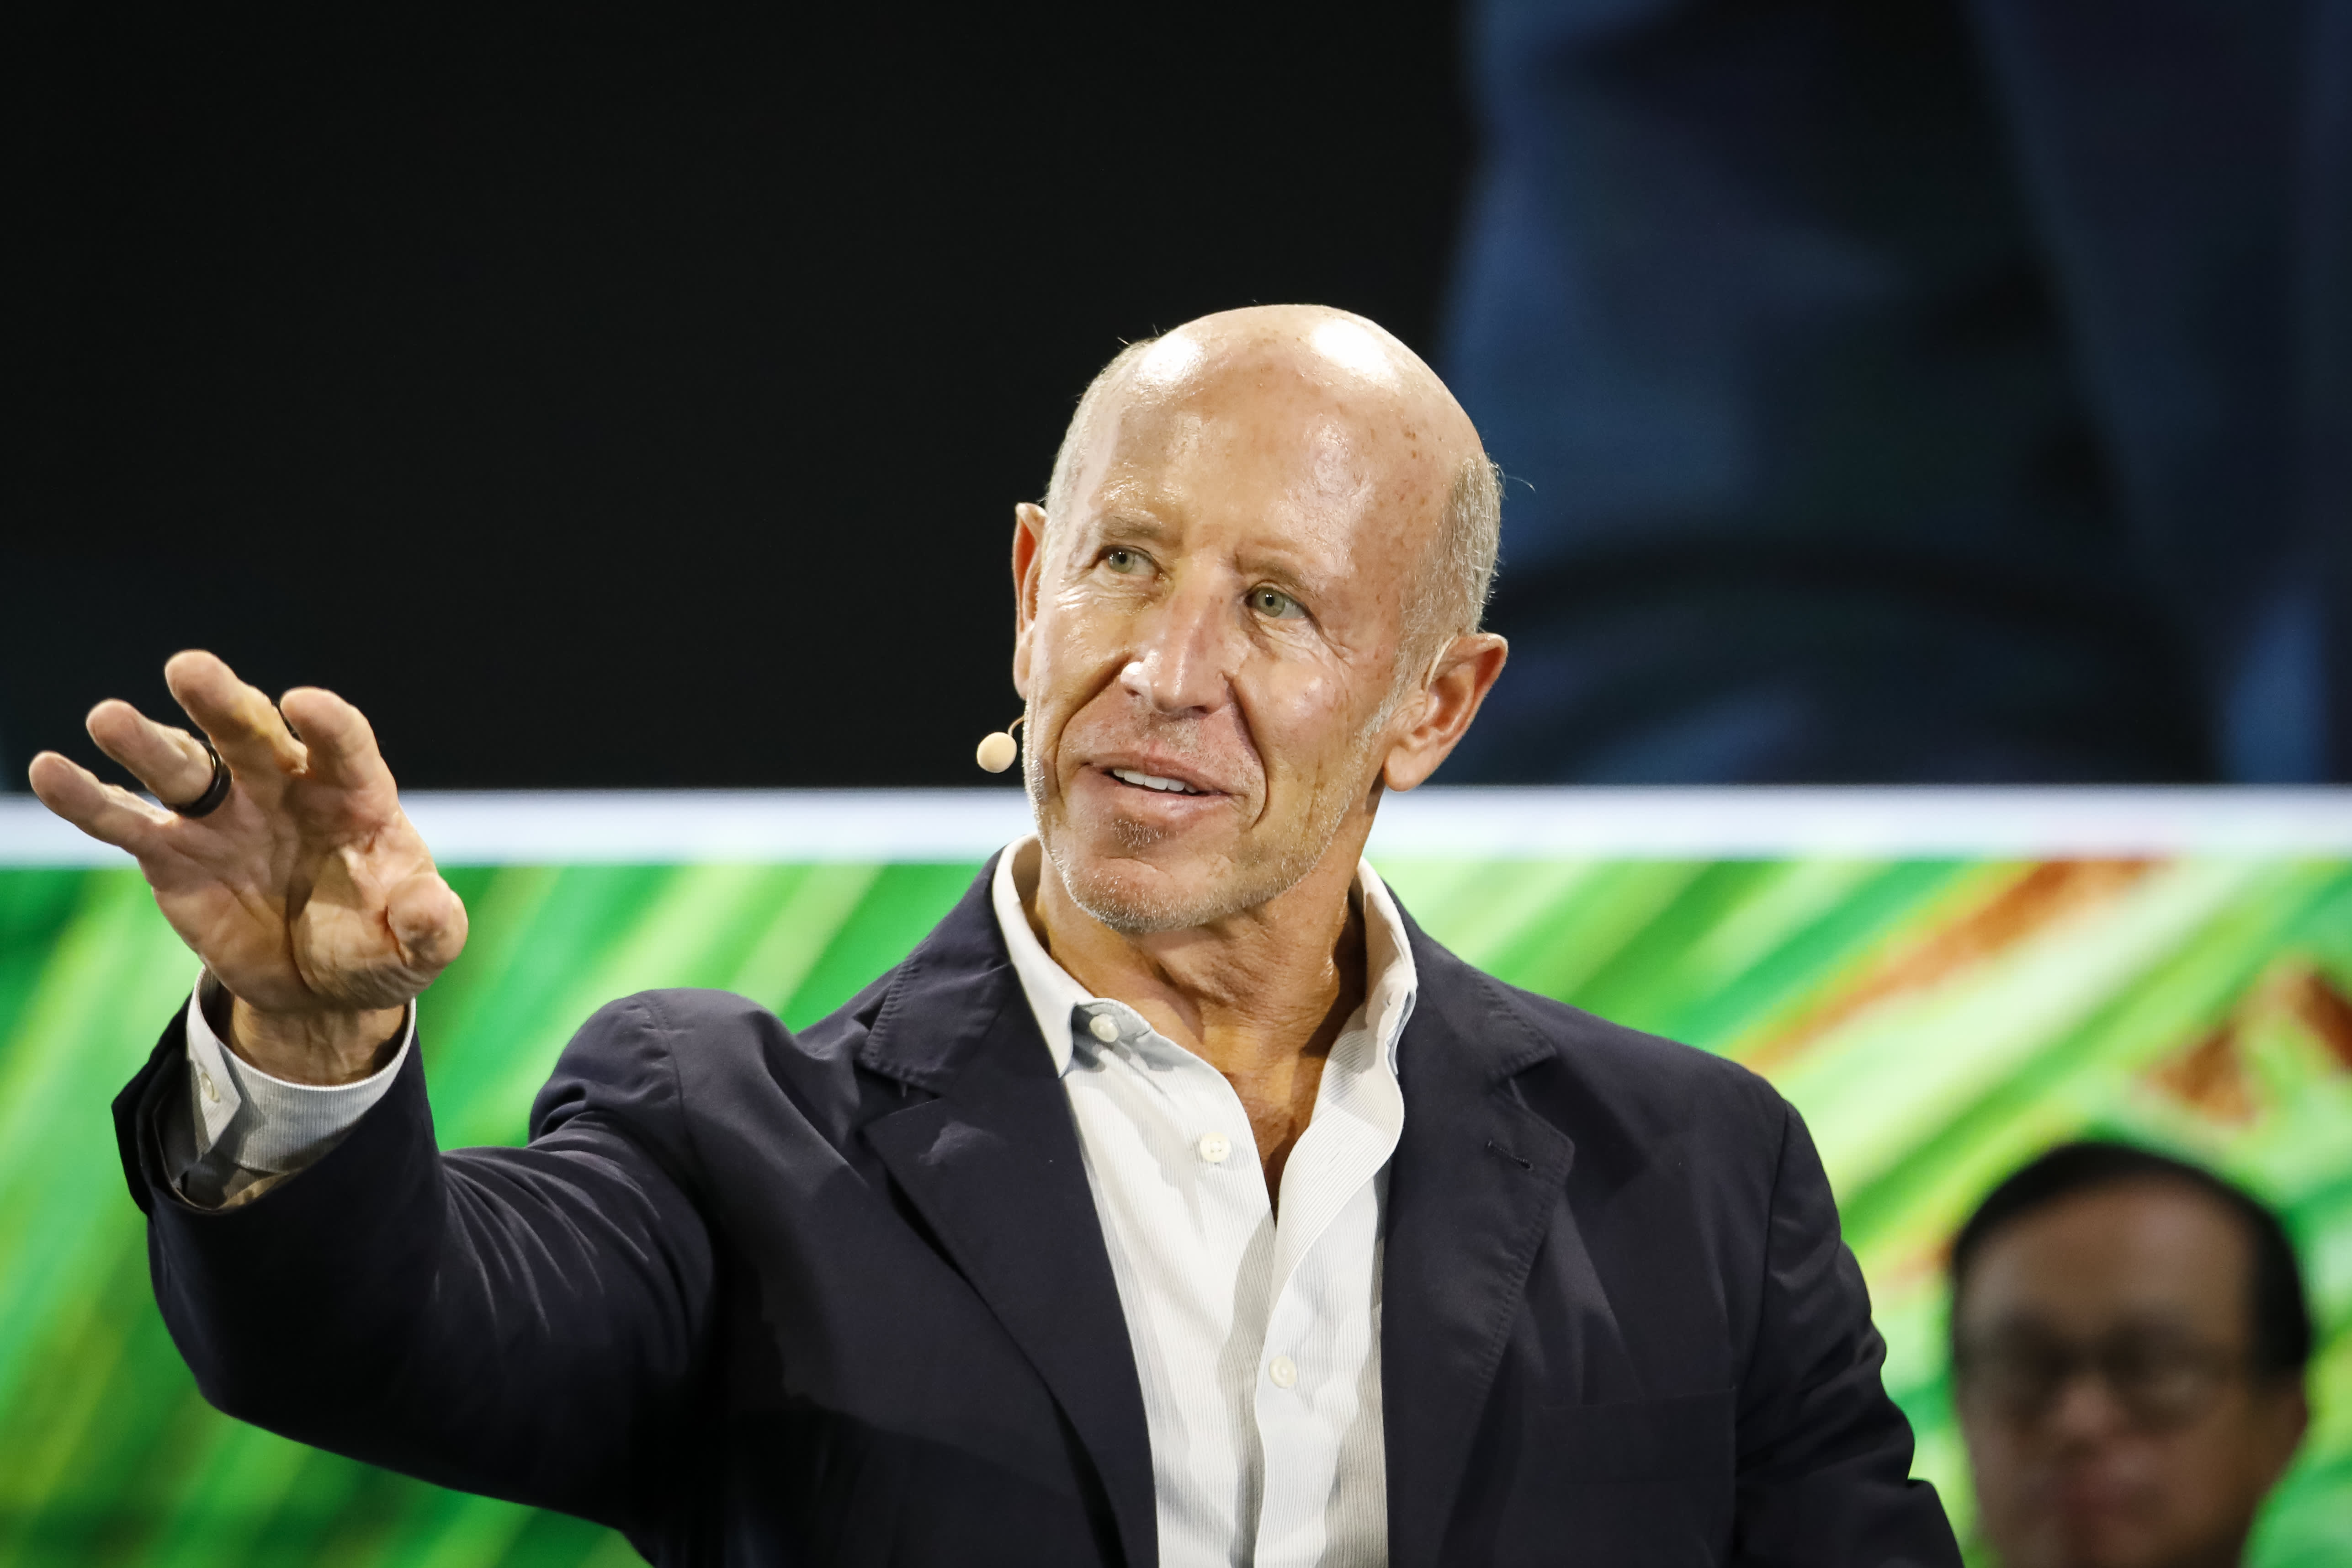 Starwood Capital's Barry Sternlicht says the U.S. is going into a 'serious' recession